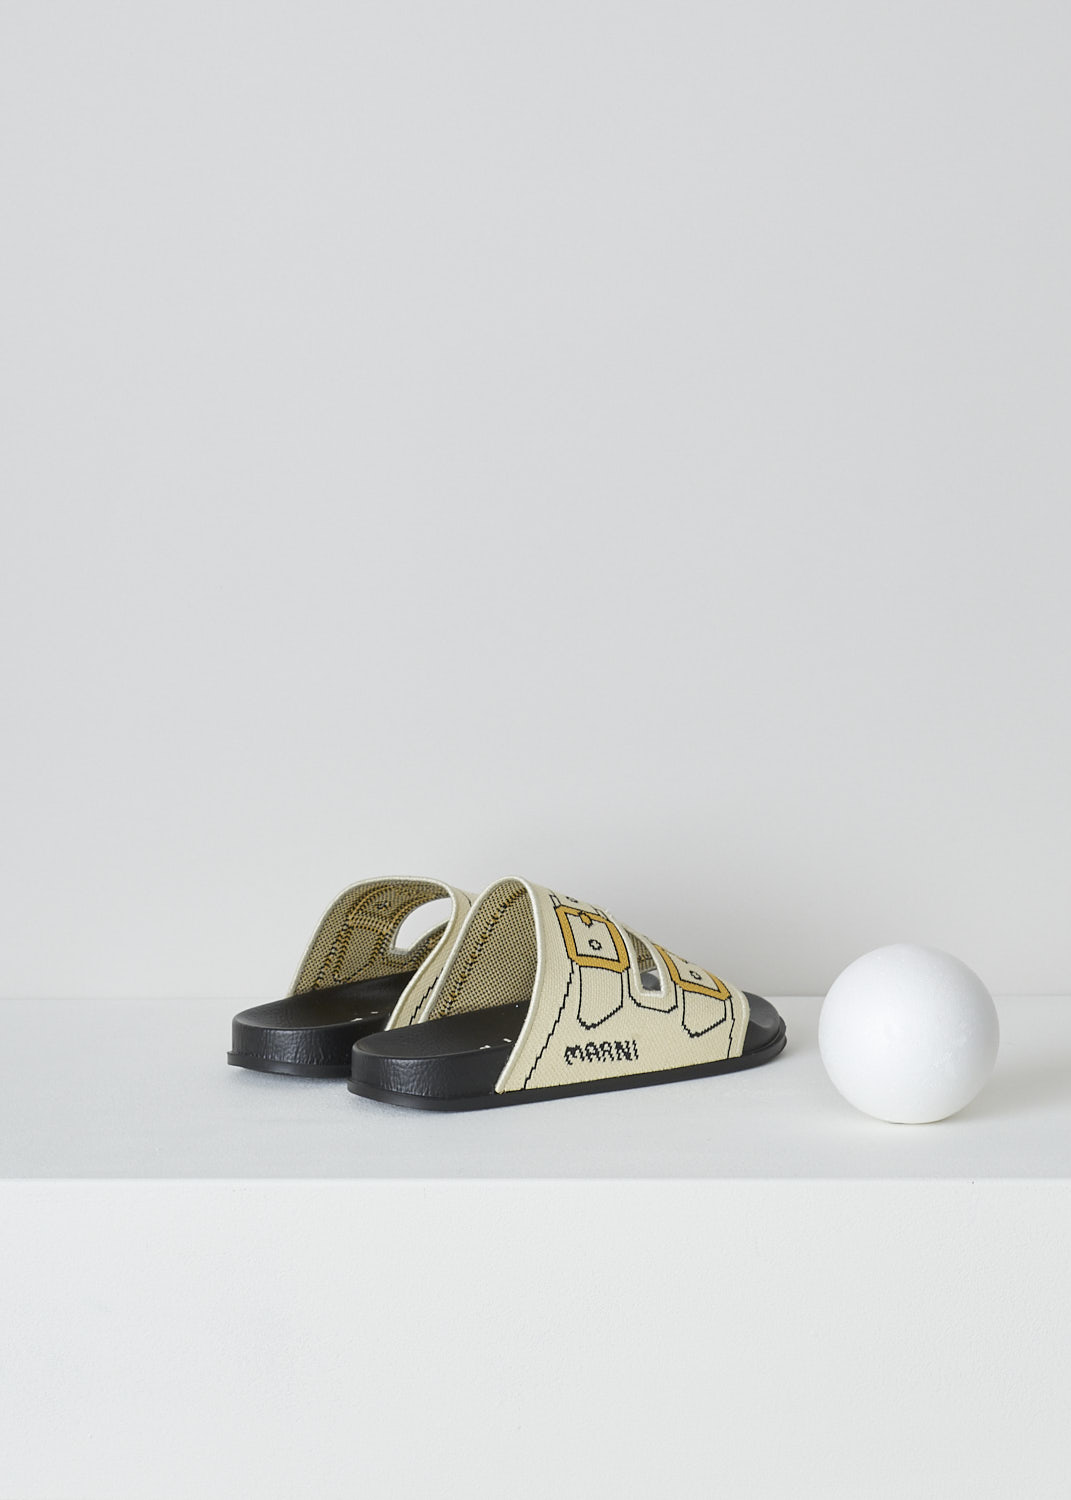 MARNIm OFF-WHITE TROMPE L'OEIL JACQUARD SLIDES, SAMS015802_P4547_ZO202, White, Back, These off-white knitted slides have a trompe l'oeil image woven into the straps across the vamp. The image depicts straps with gold buckles. The brand's logo is woven into the side. These slip-on slides have a round open toe. The slides have a molded footbed and a flat rubber sole. 